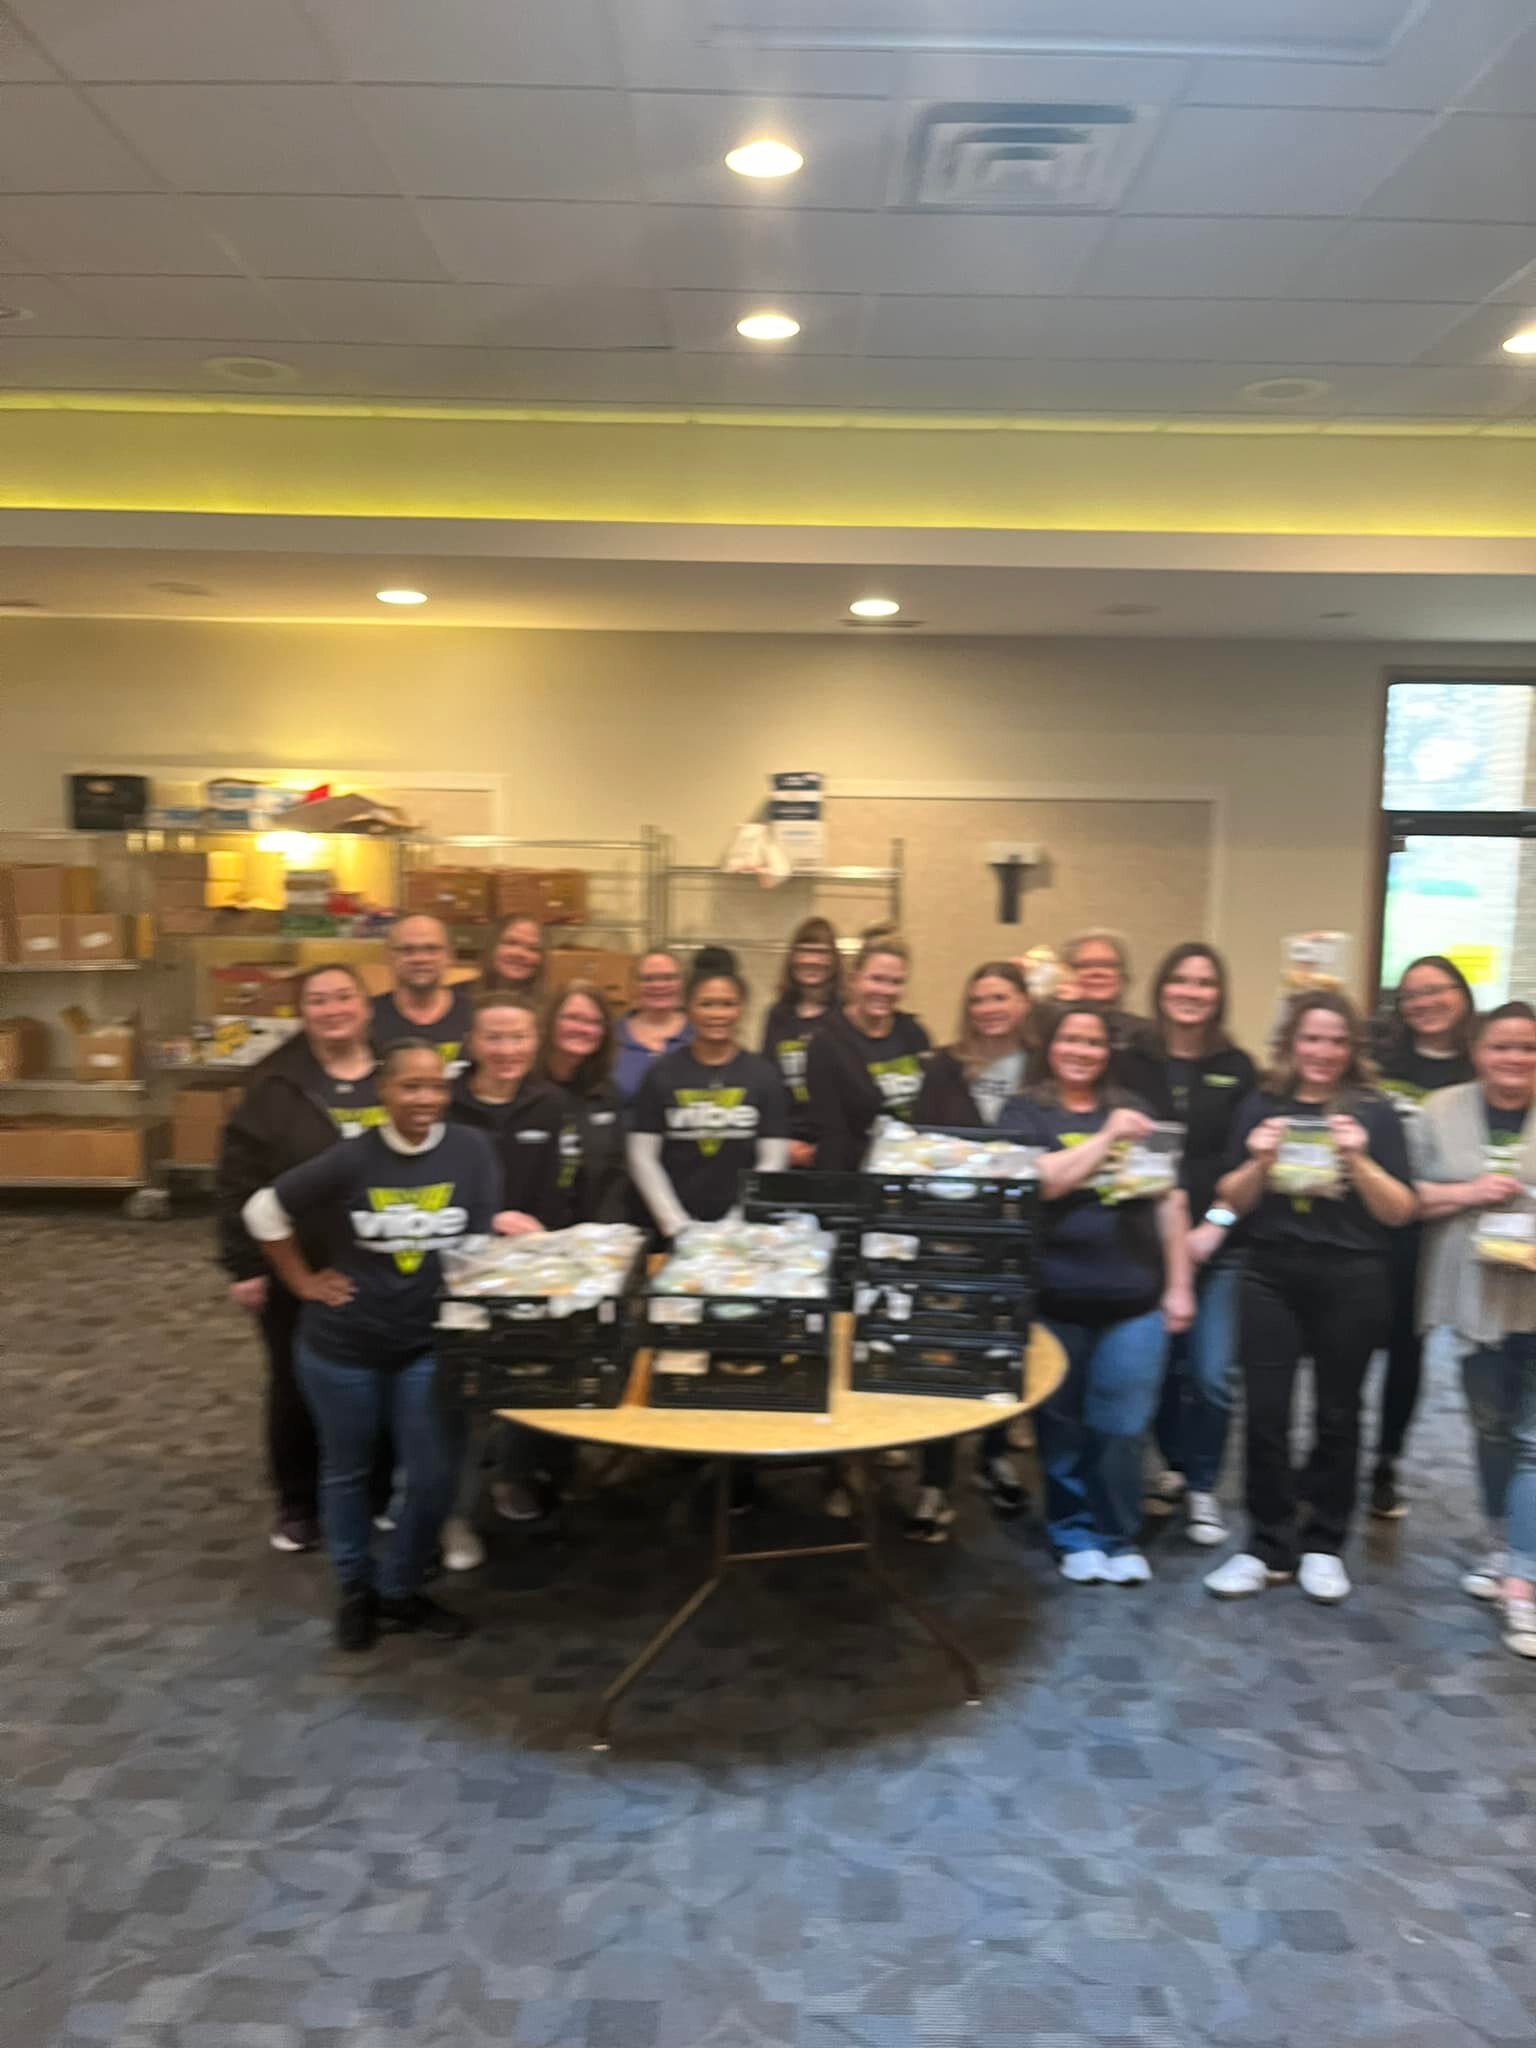 Thank you Vibe Credit Union.  Last week. We had a 2 day event with Vibe where they packed 600 meal kits and made over 400 soup kits.  Wow!!! Thank you to the amazing team at Vibe Credit Union. They really care about their community. #wastelessfeedmor